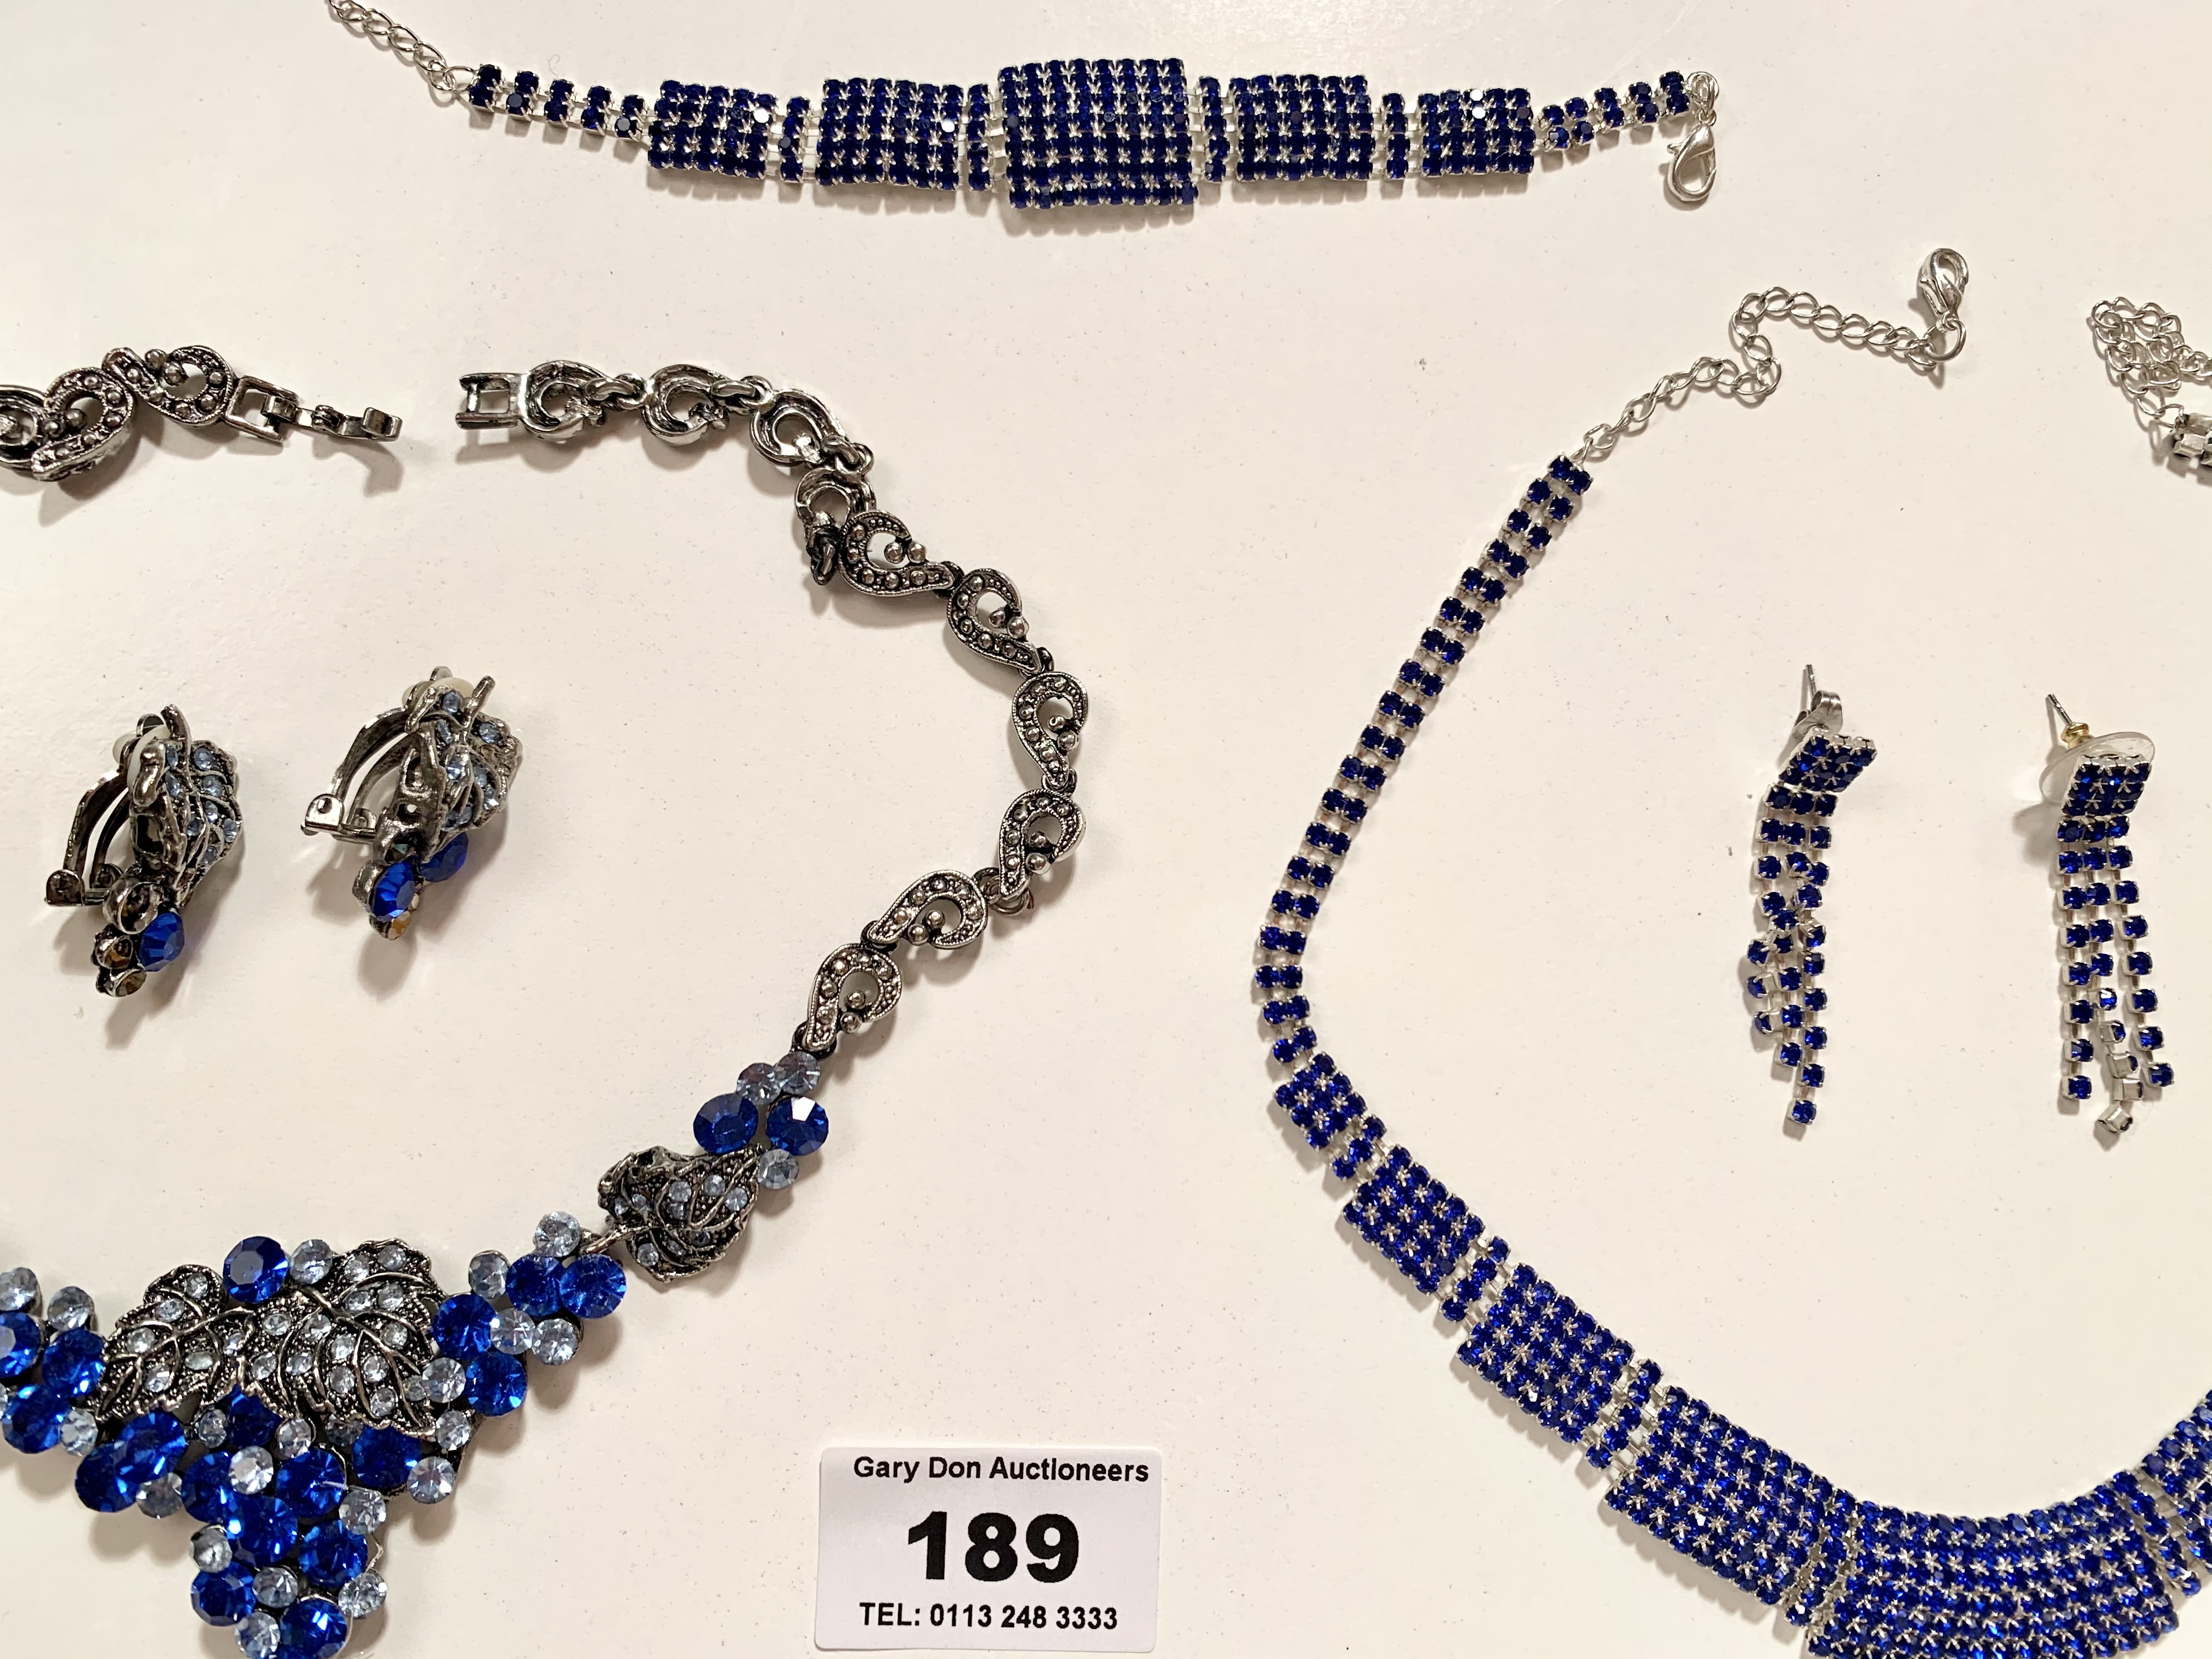 2 sets of blue dress necklaces, bracelets and earrings - Image 2 of 2